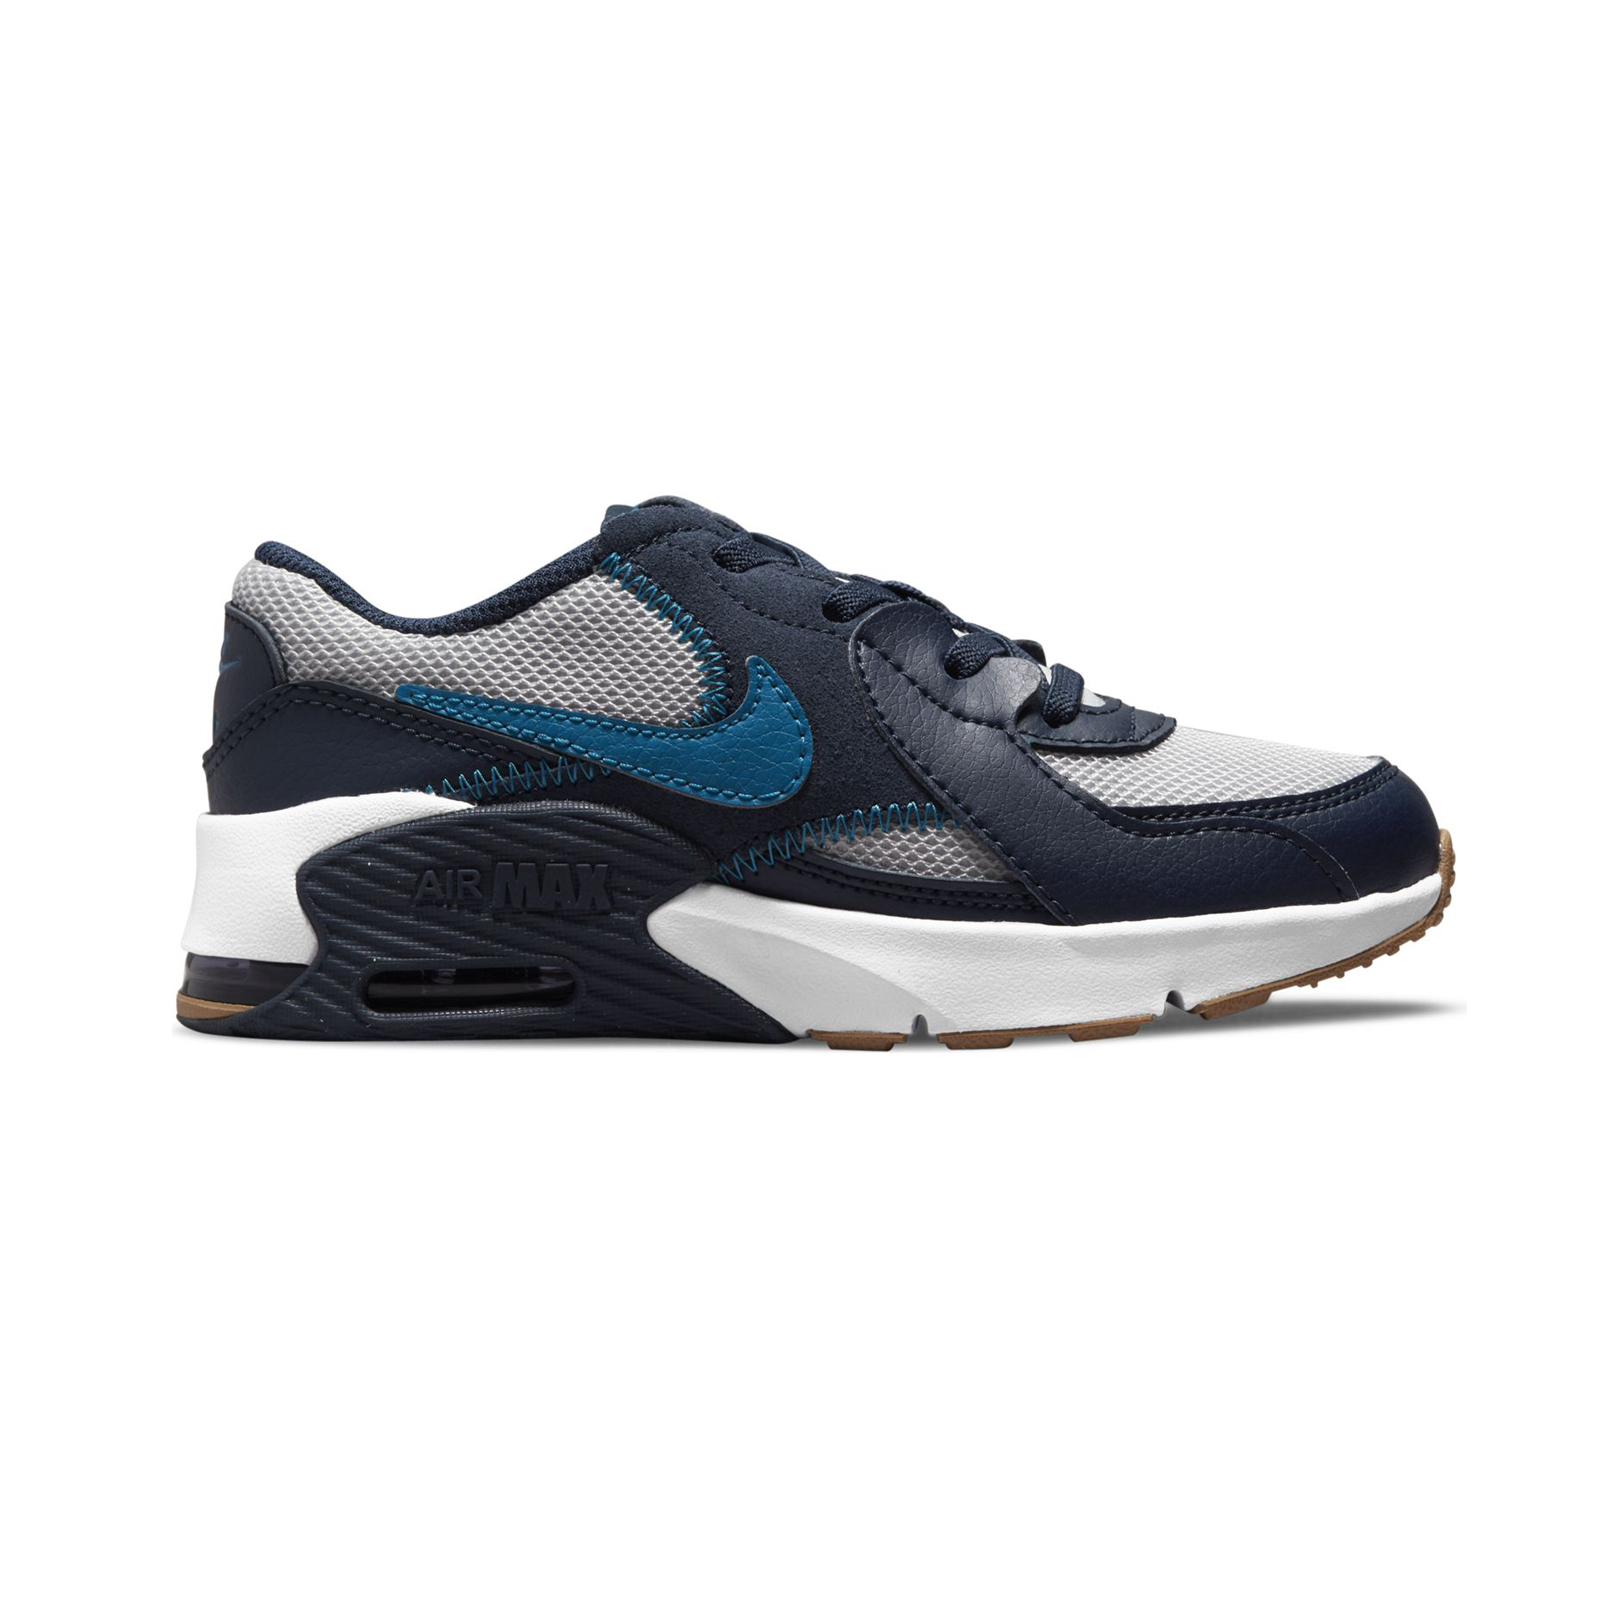 Nike - NIKE AIR MAX EXCEE (PS) - GREY FOG/IMPERIAL BLUE-MIDNIGHT NAVY 550516